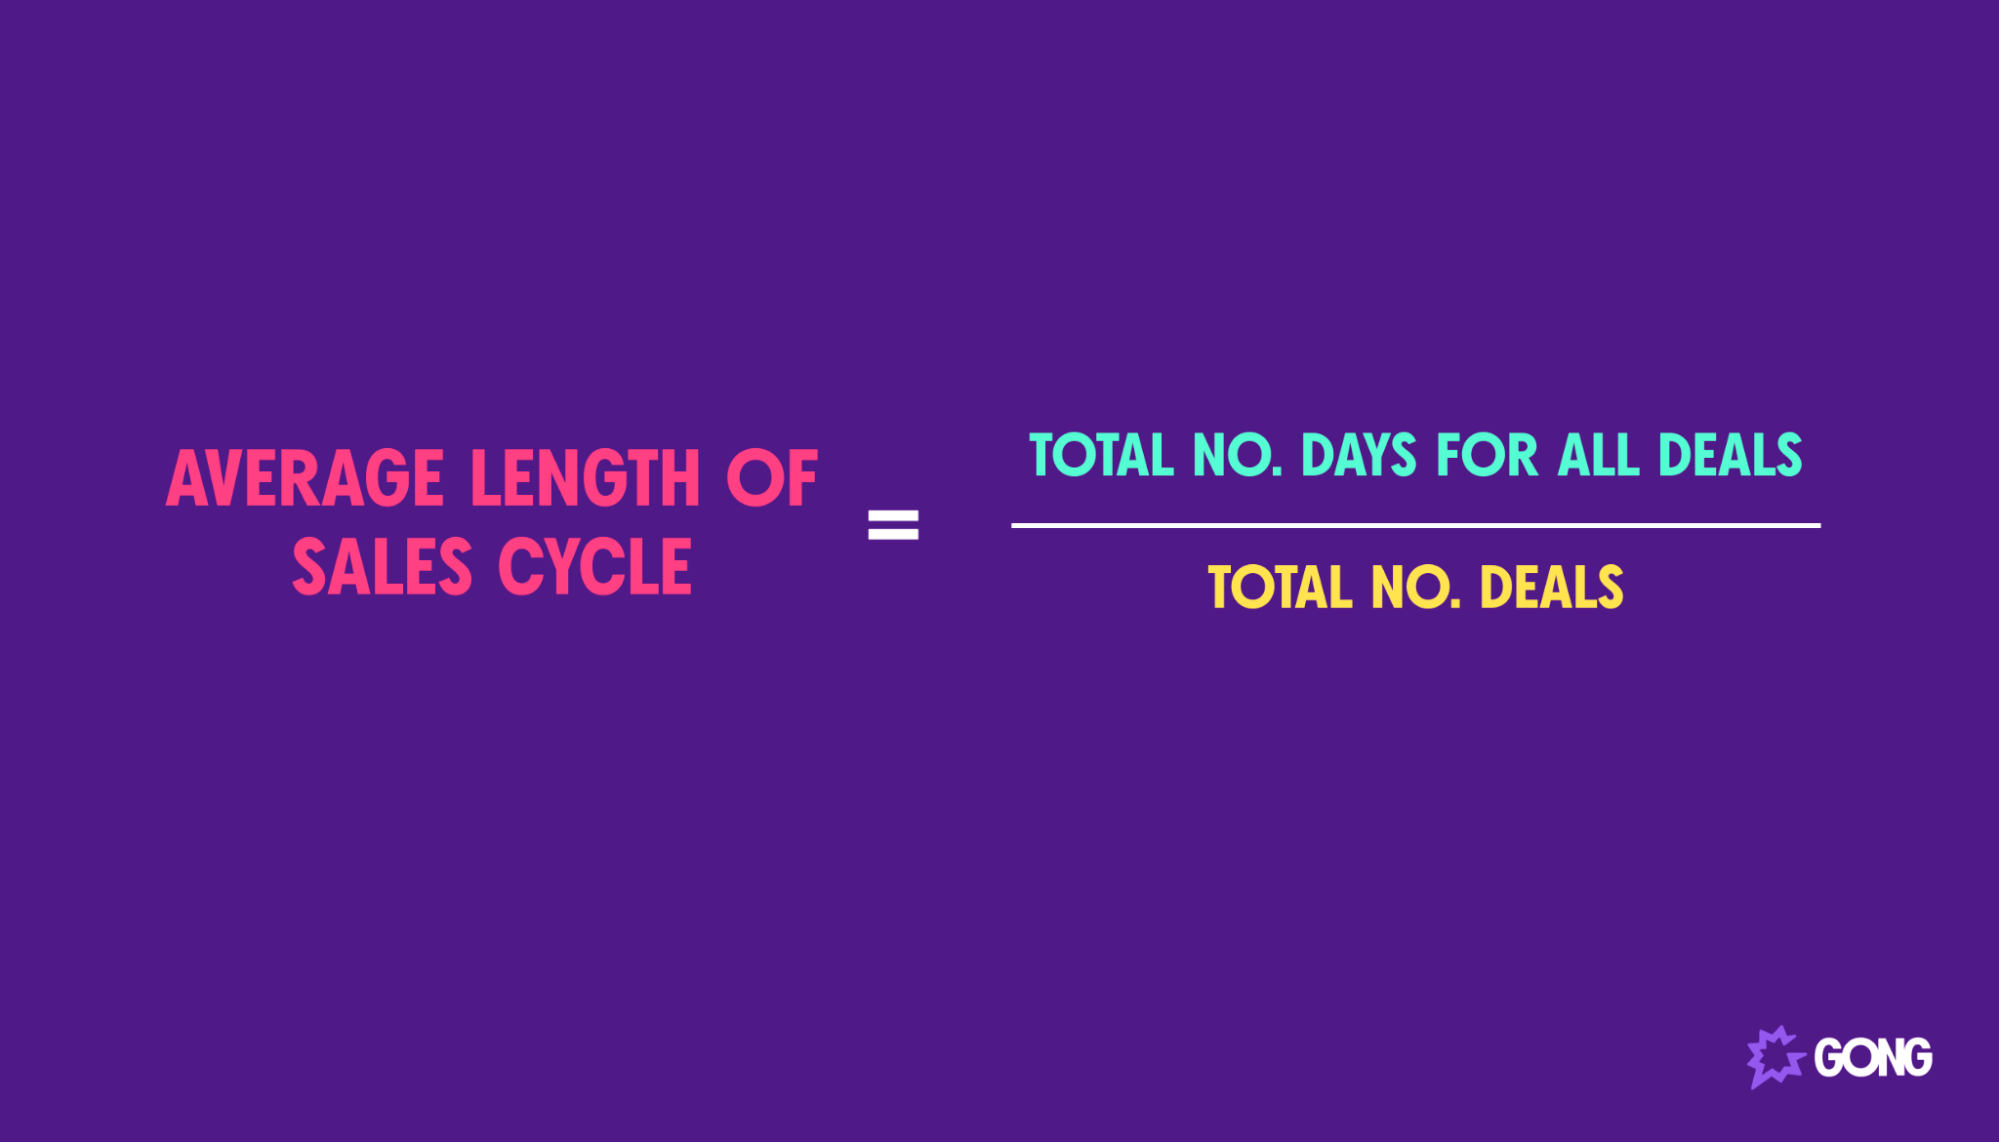 Calculation for the average length of a sales cycle